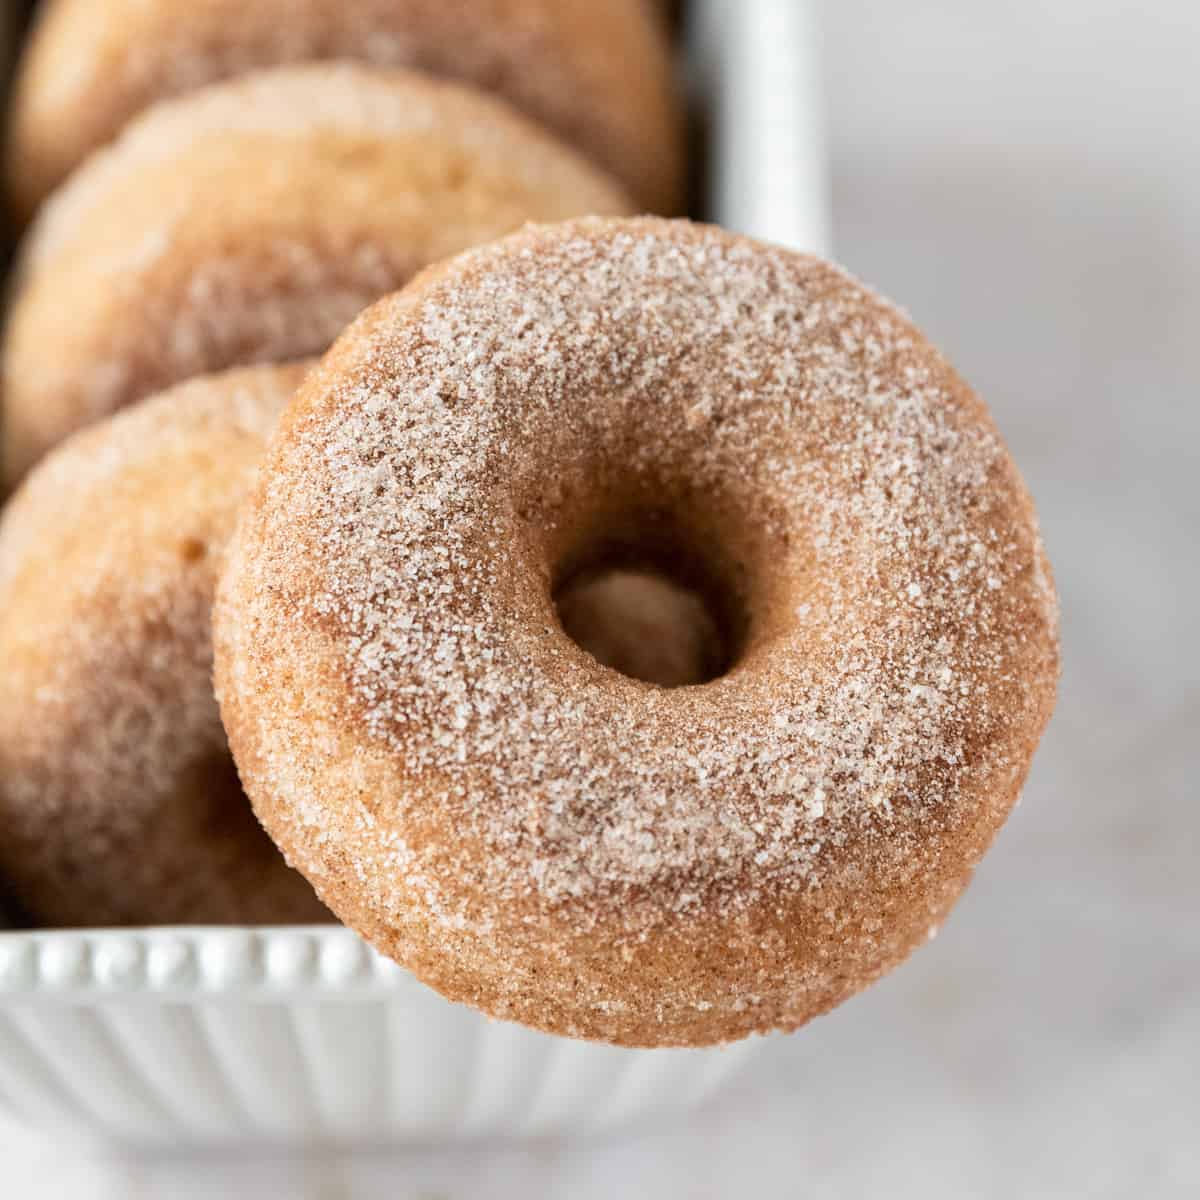 a cinnamon sugar donut balanced on the edge of a white dish with other donuts in the background